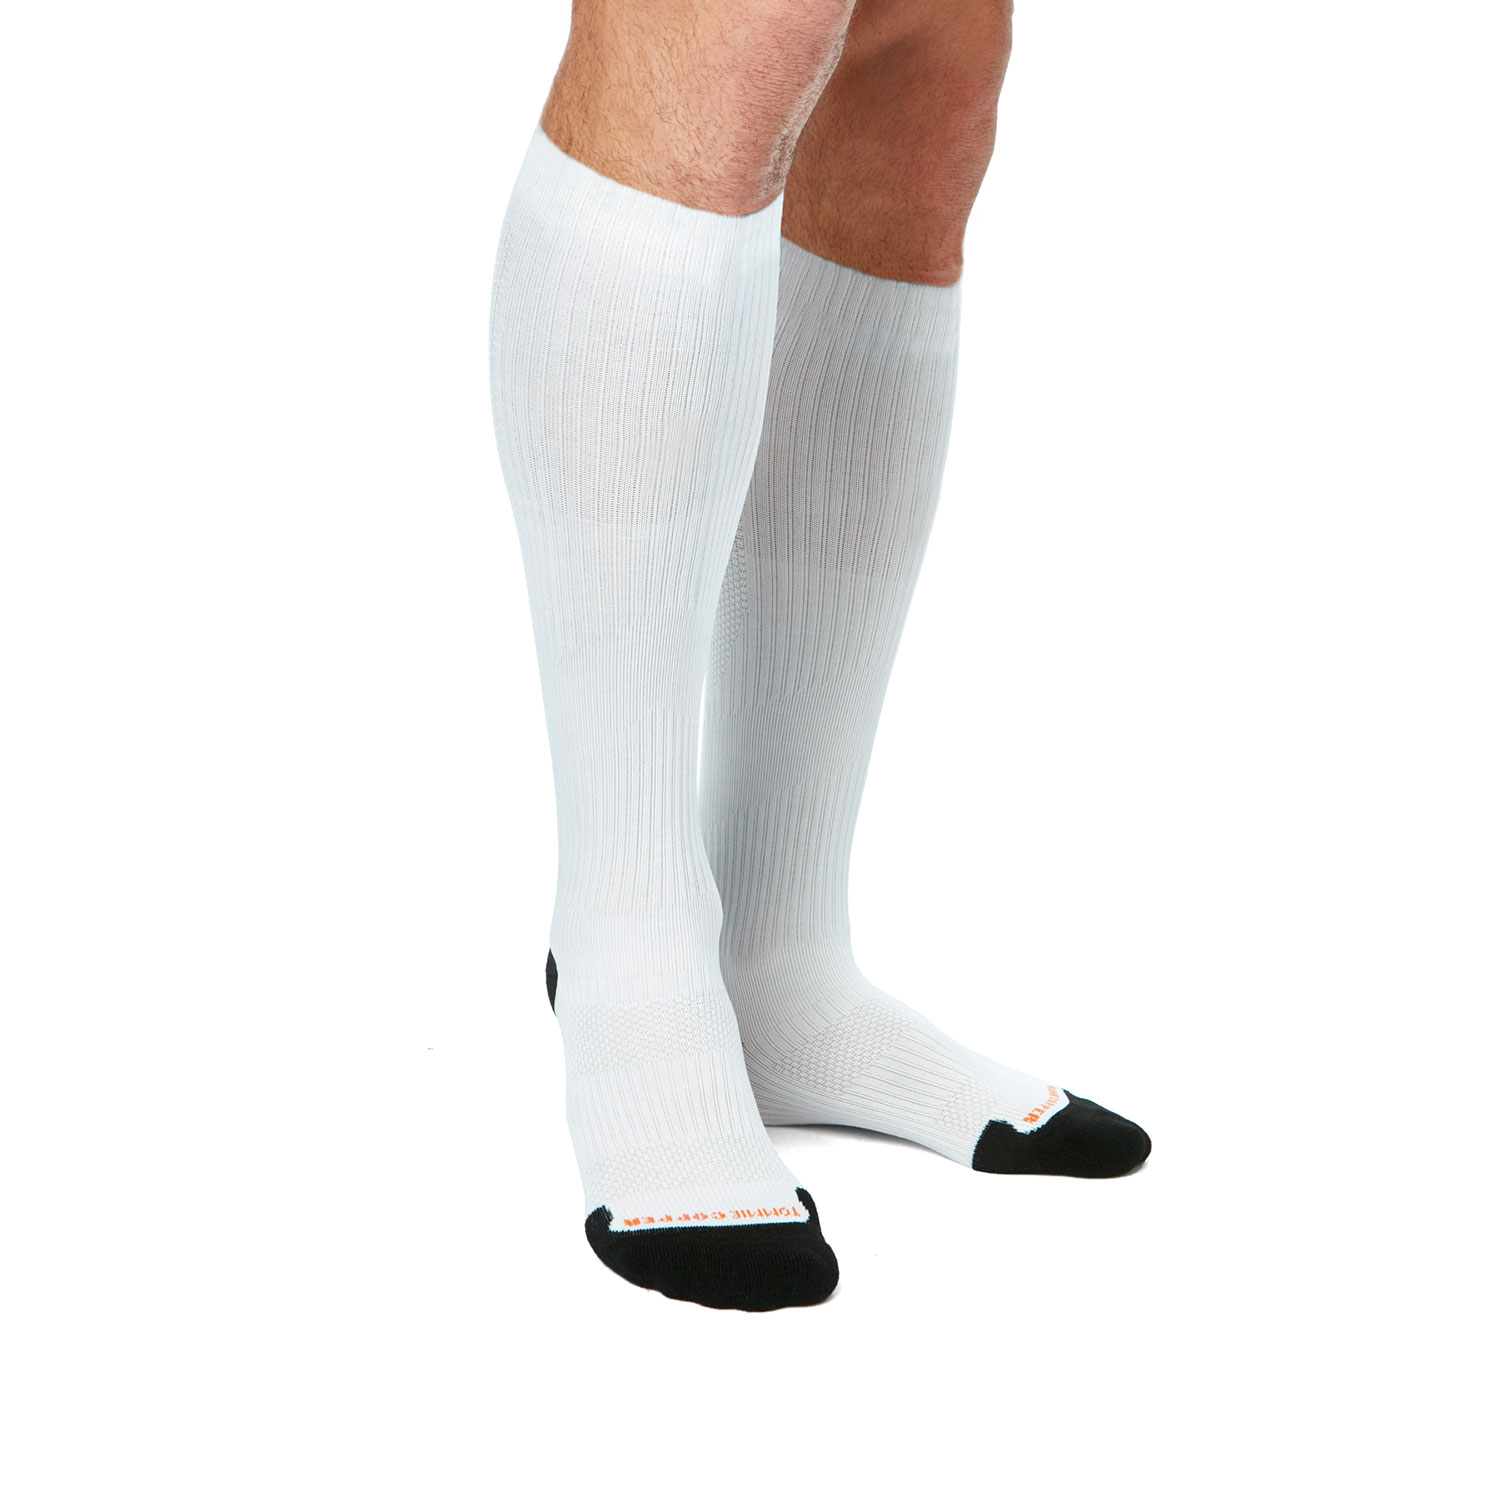 Tommie Copper Lightweight Athletic Compression OTC Sock